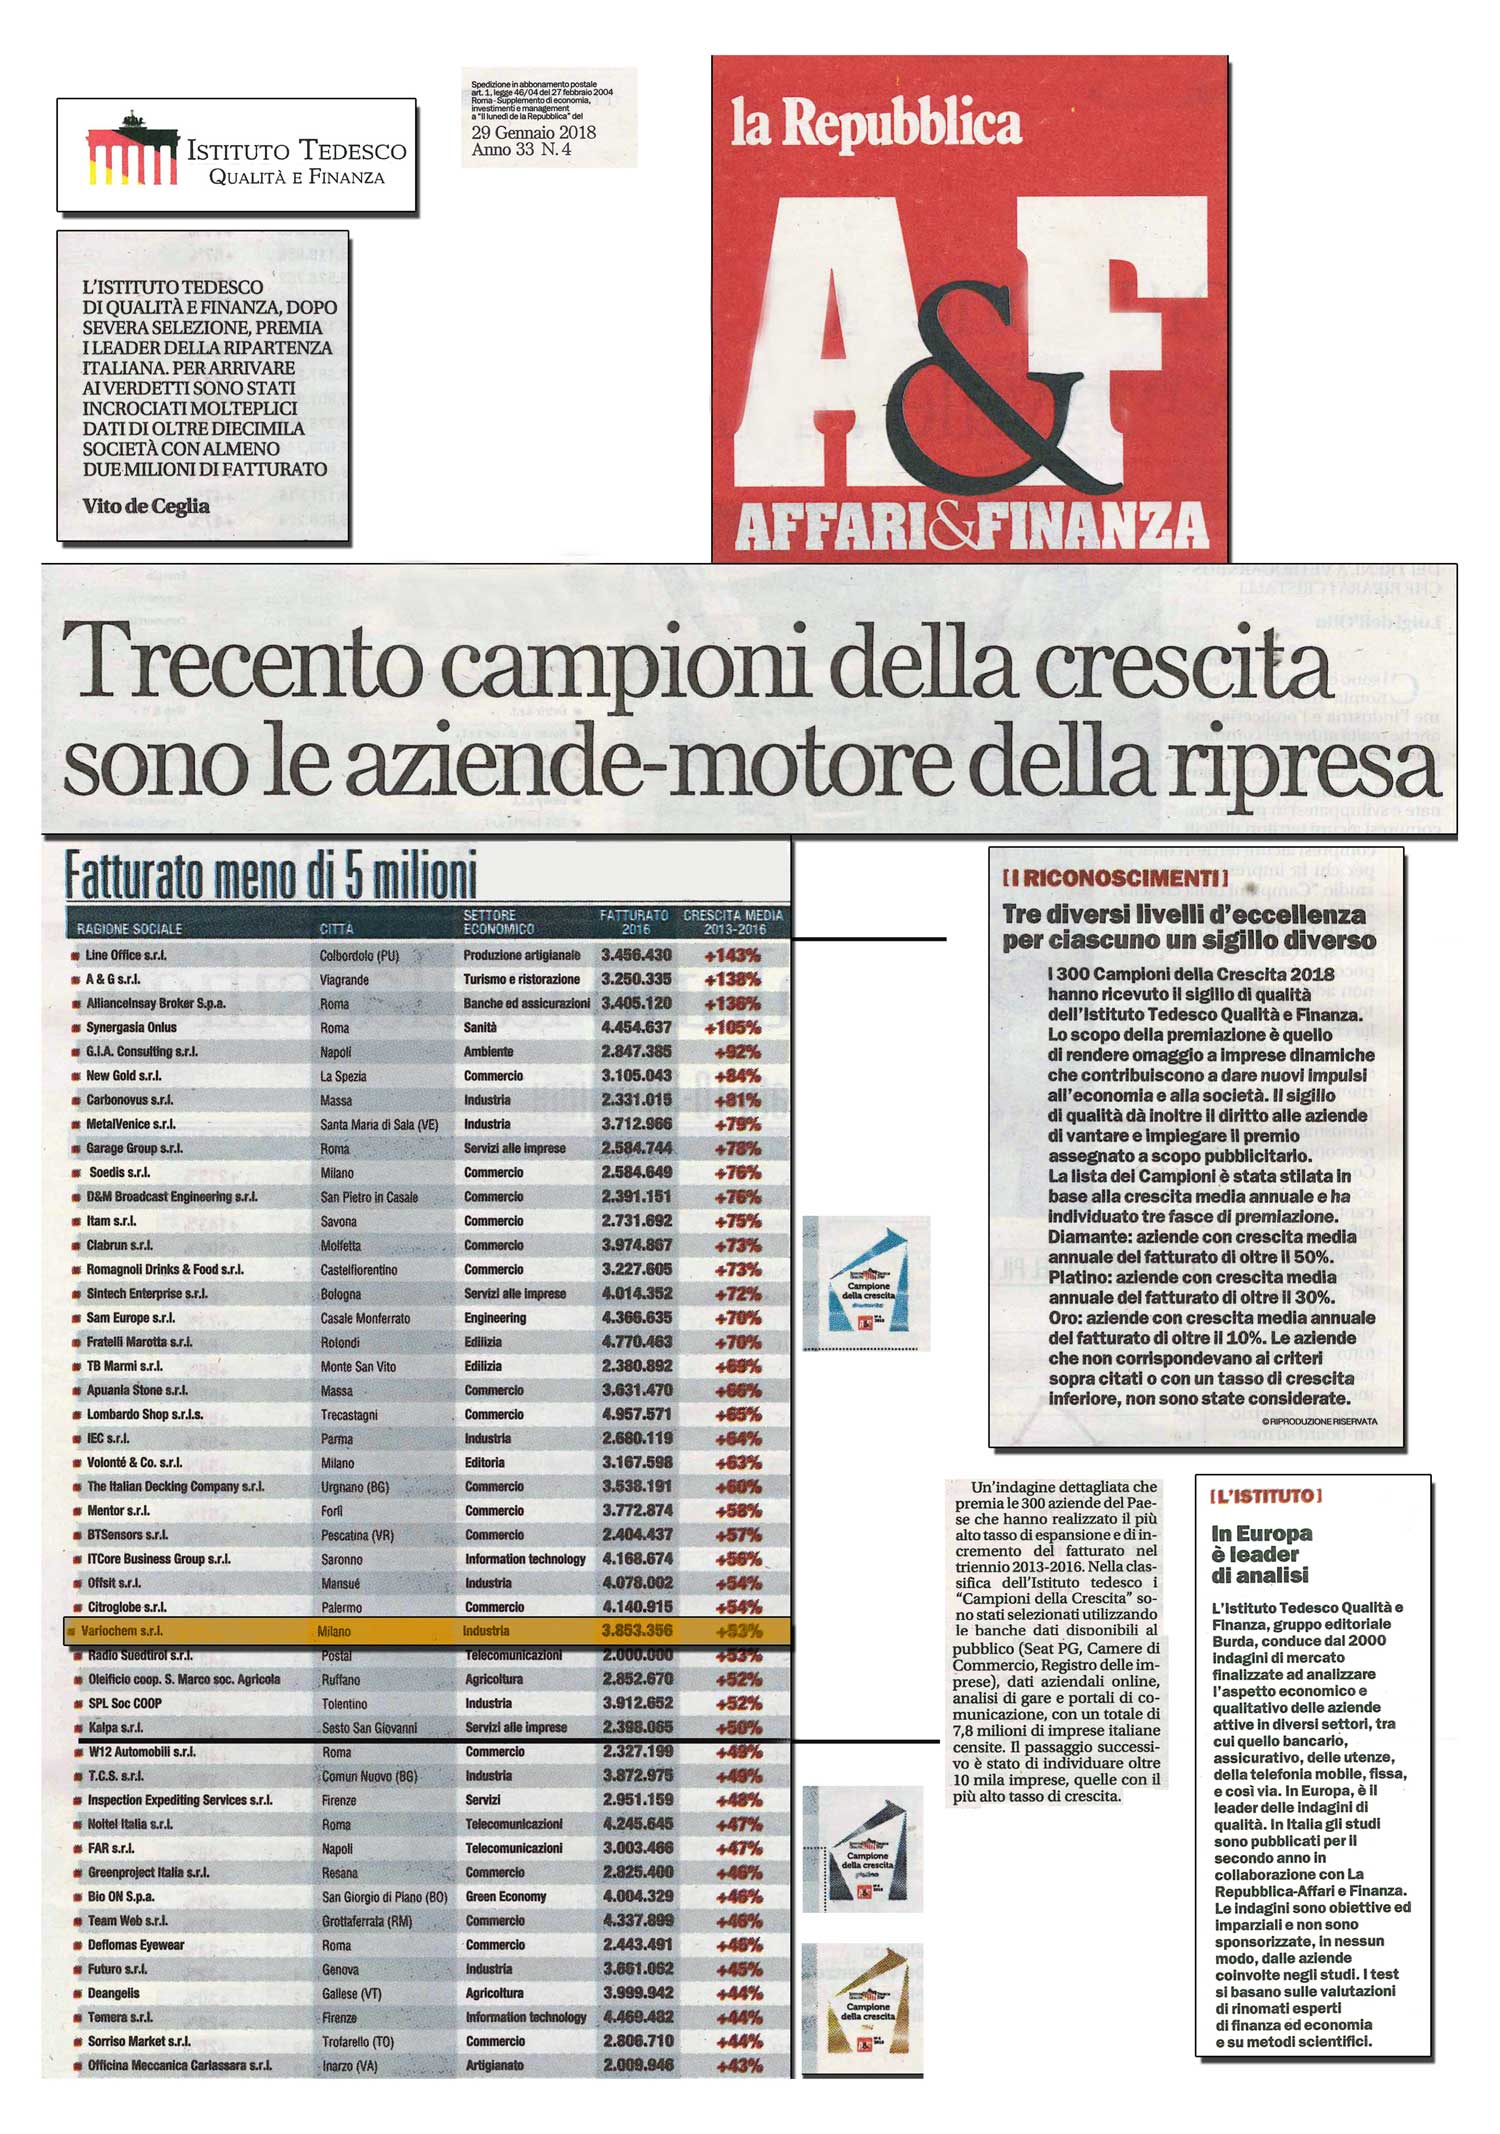 giornale 29 1 2018